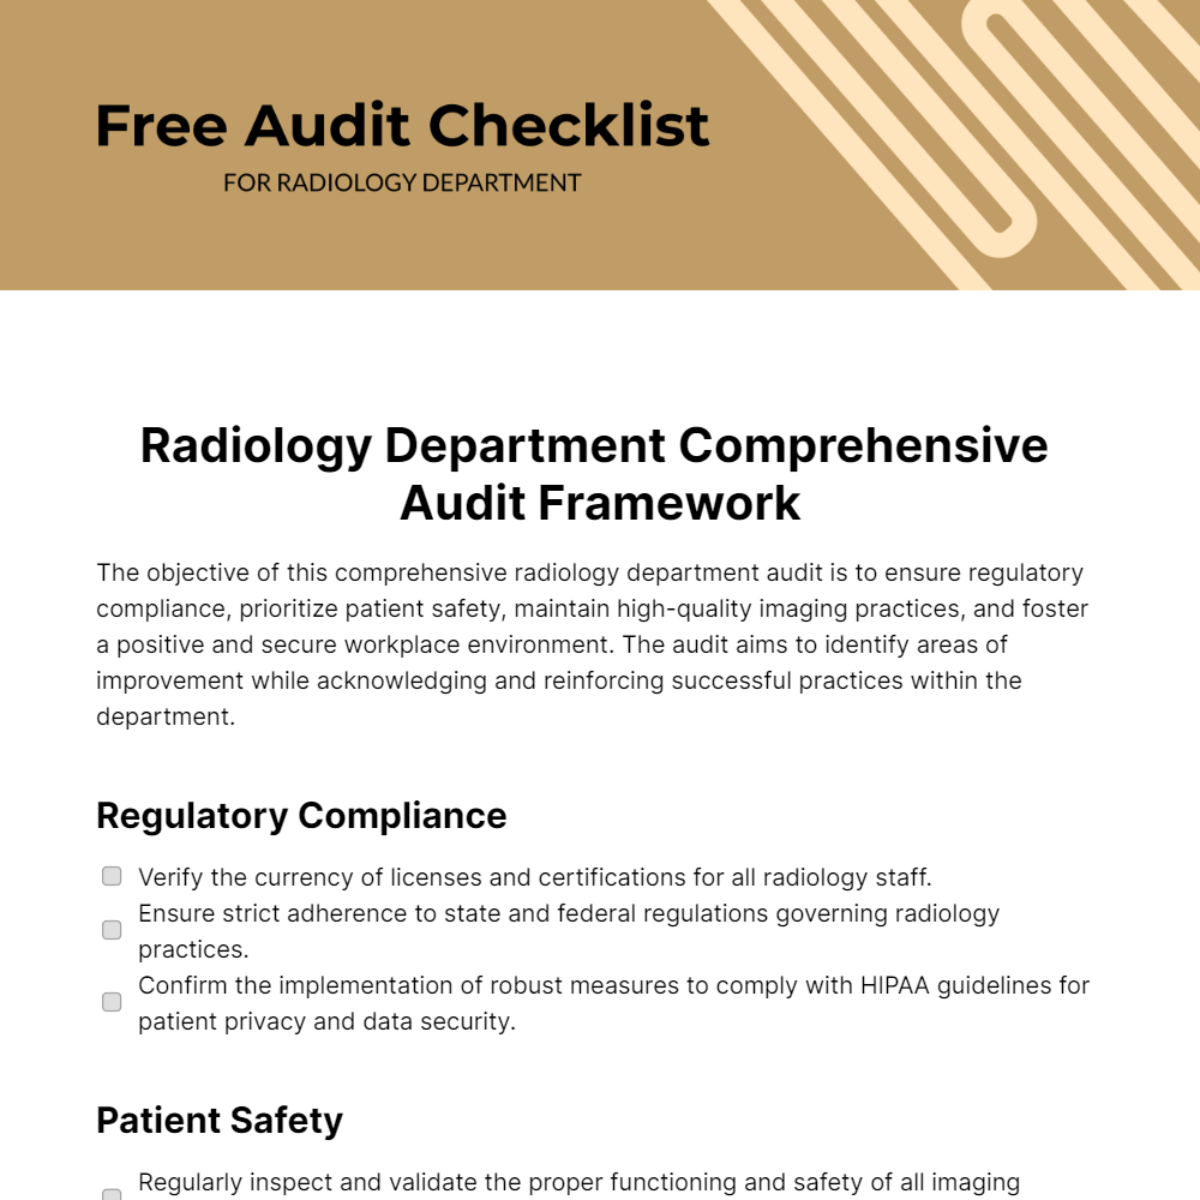 Free Audit Checklist for Radiology Department Template